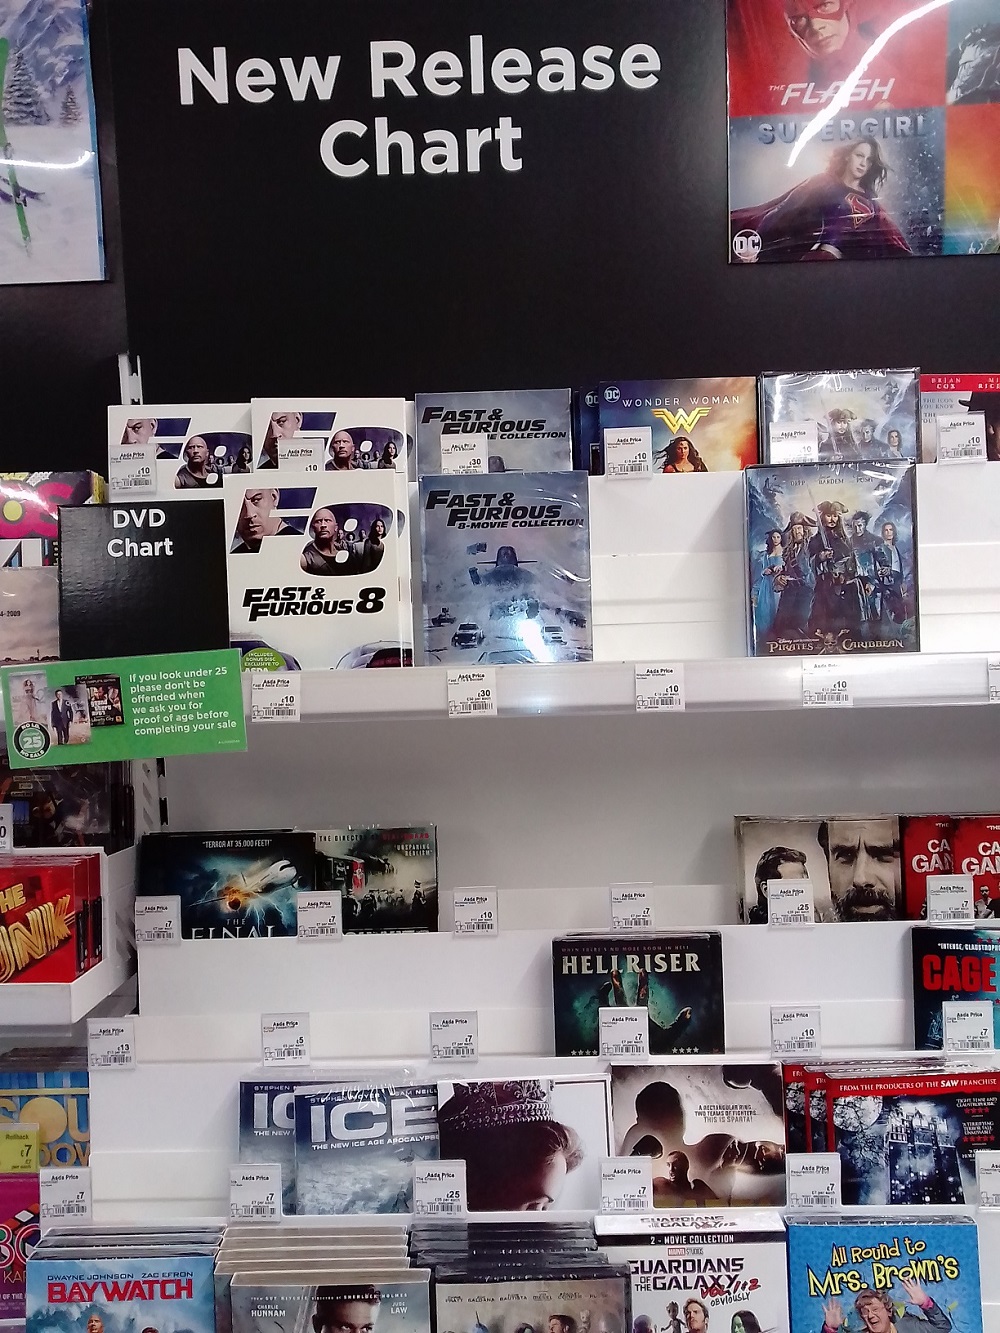 Hellriser DVD in the New Release Chart in Asda superstore Northich in Cheshire